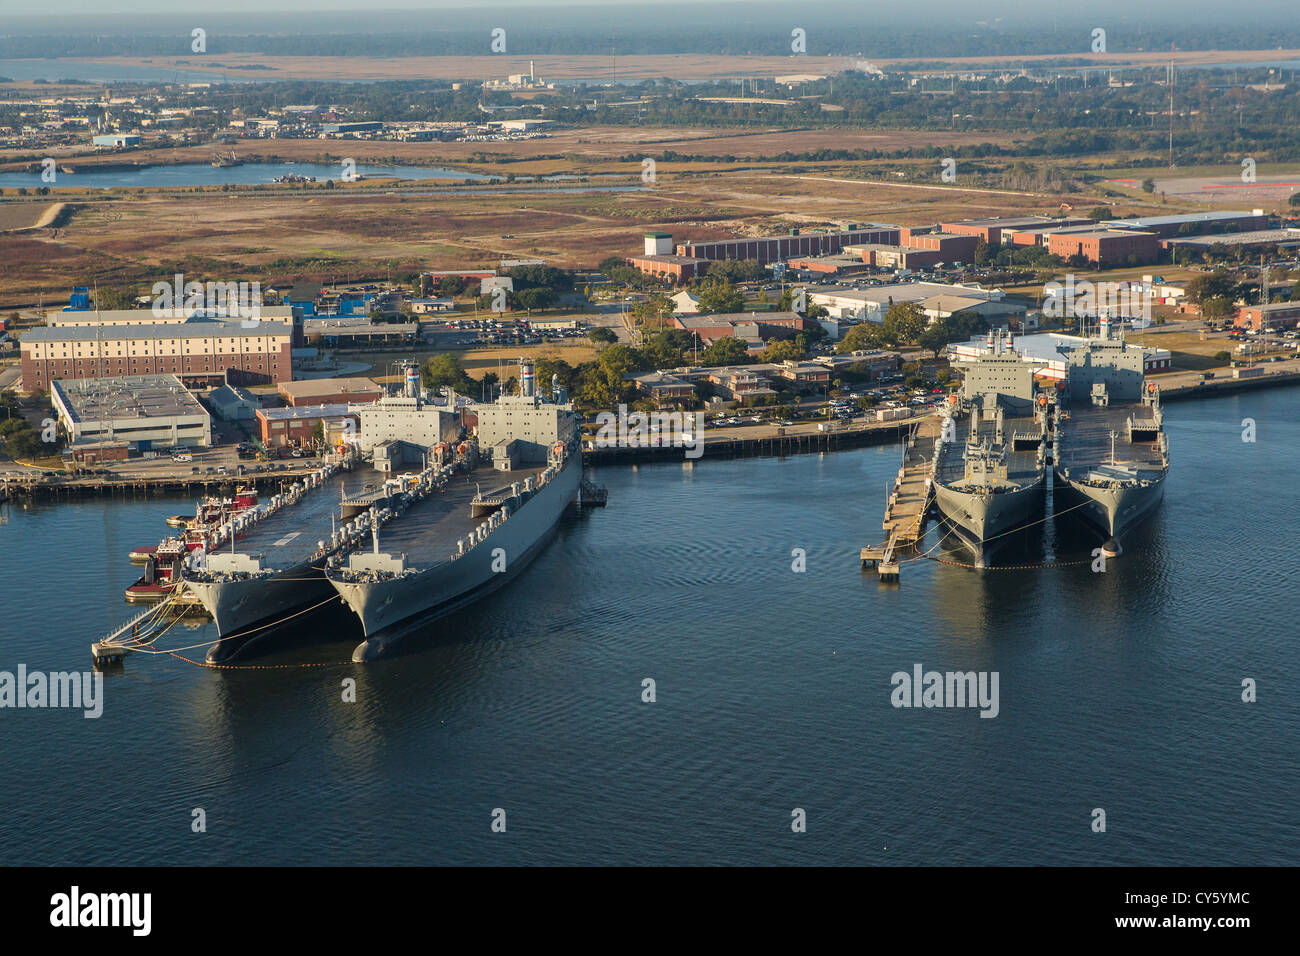 Aerial View Of The Old Navy Base With Supple Ships Charleston South